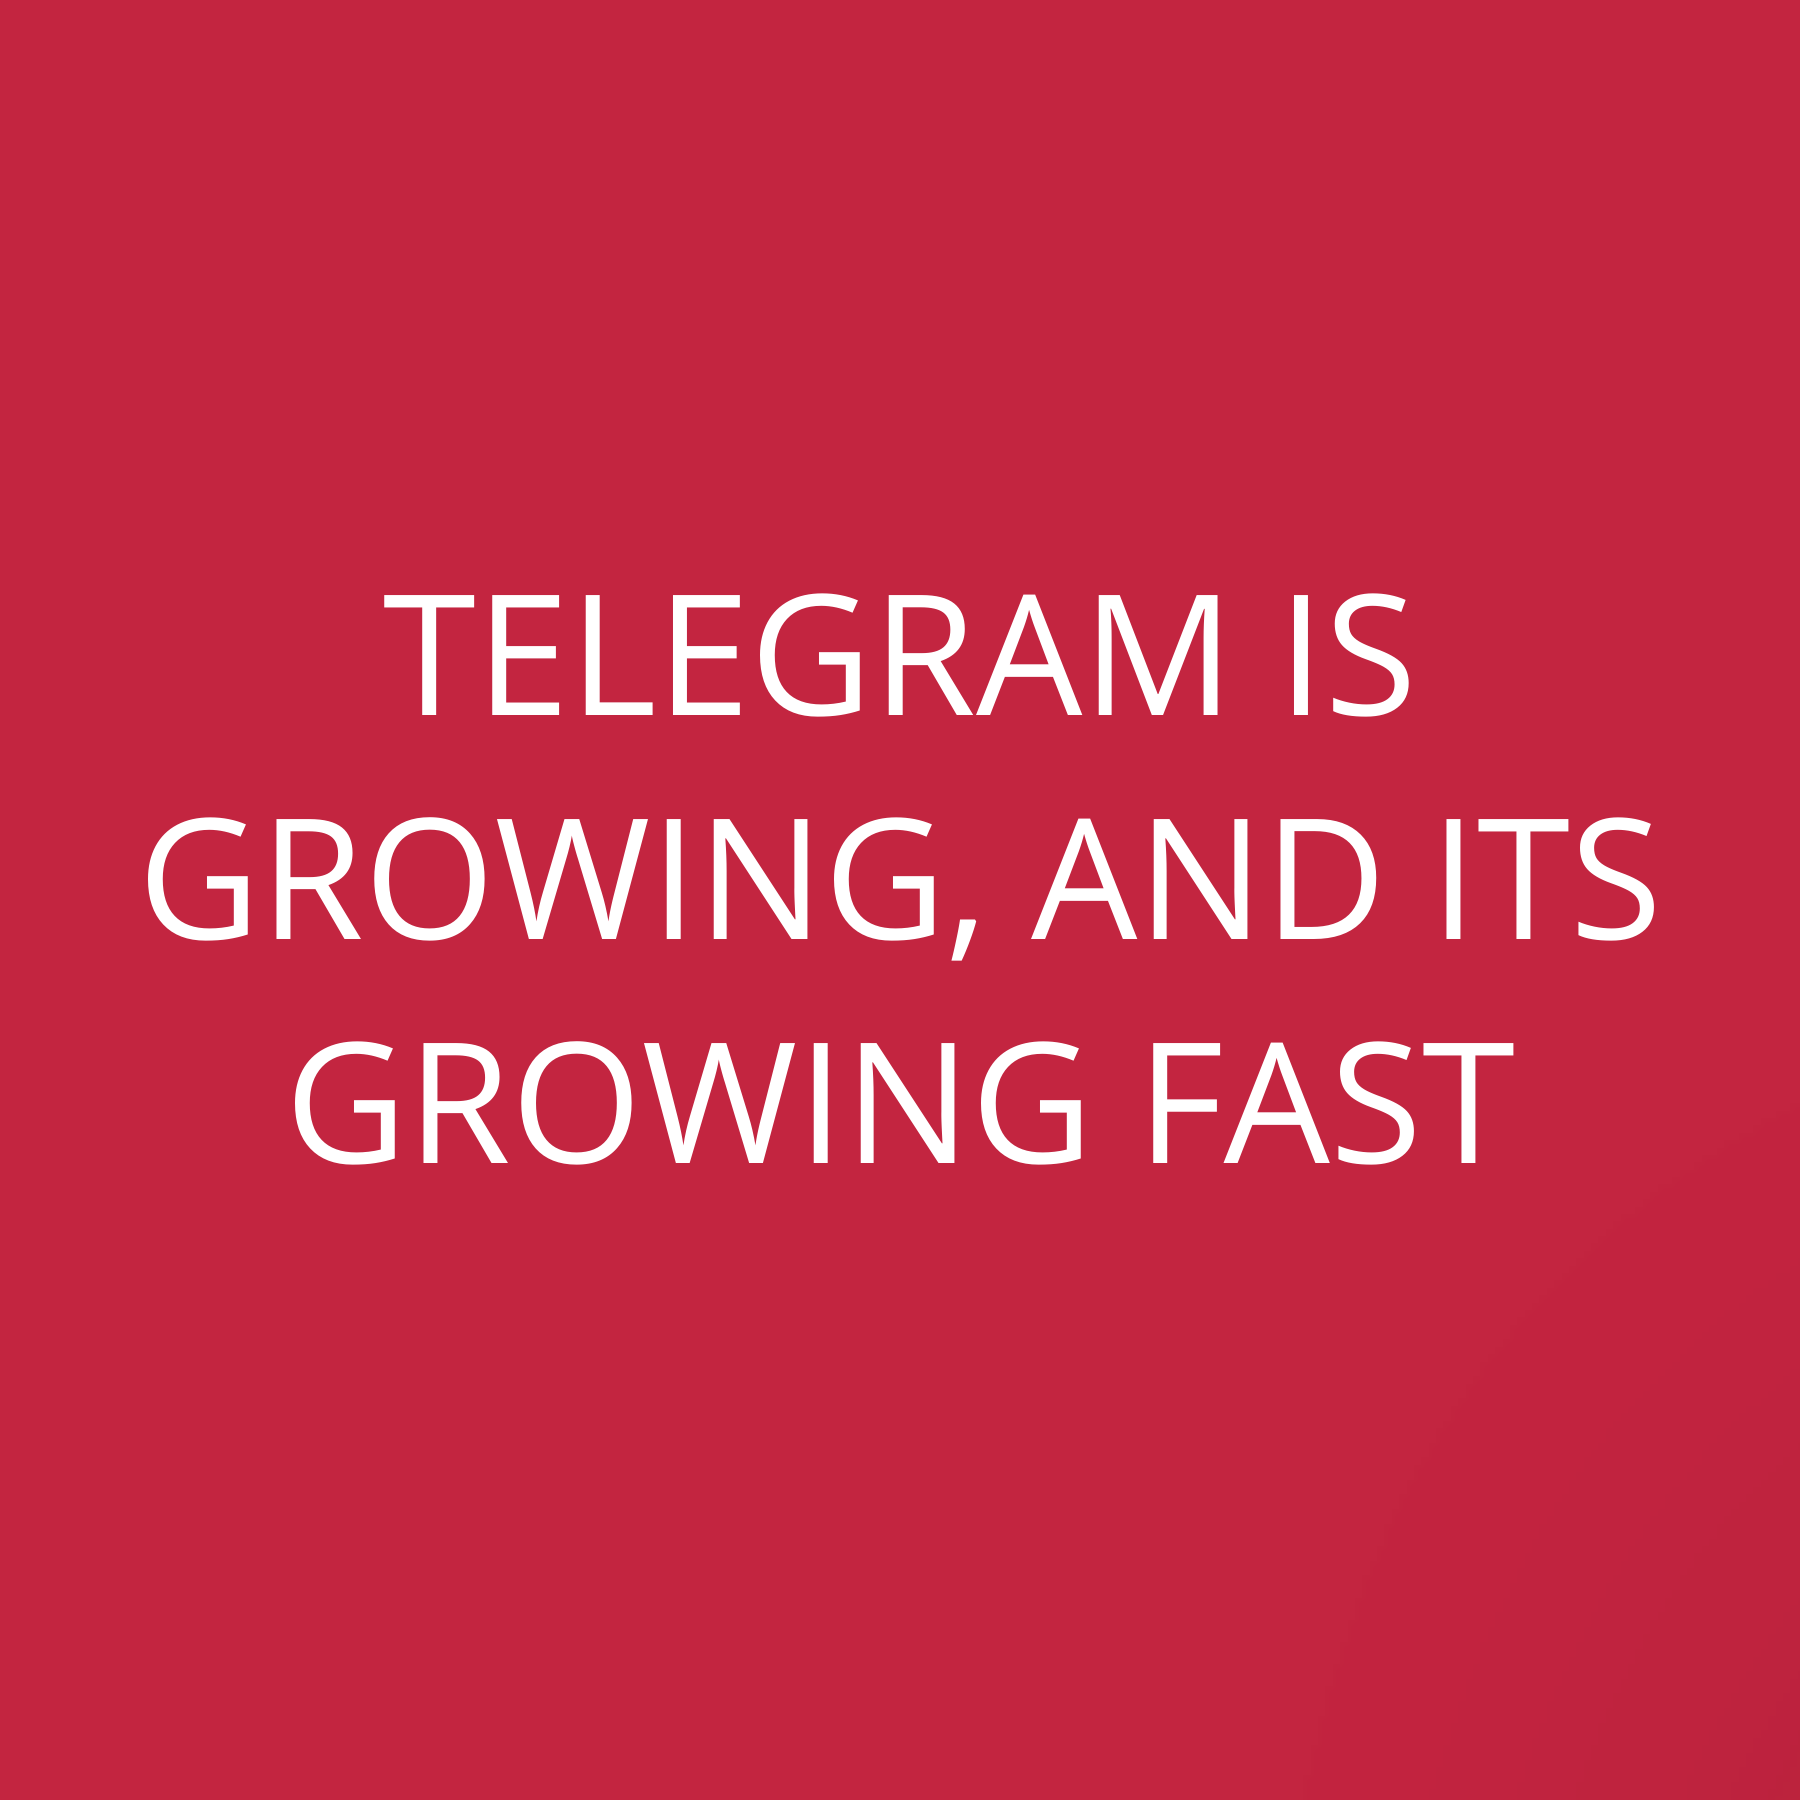 Telegram is growing, and its growing fast